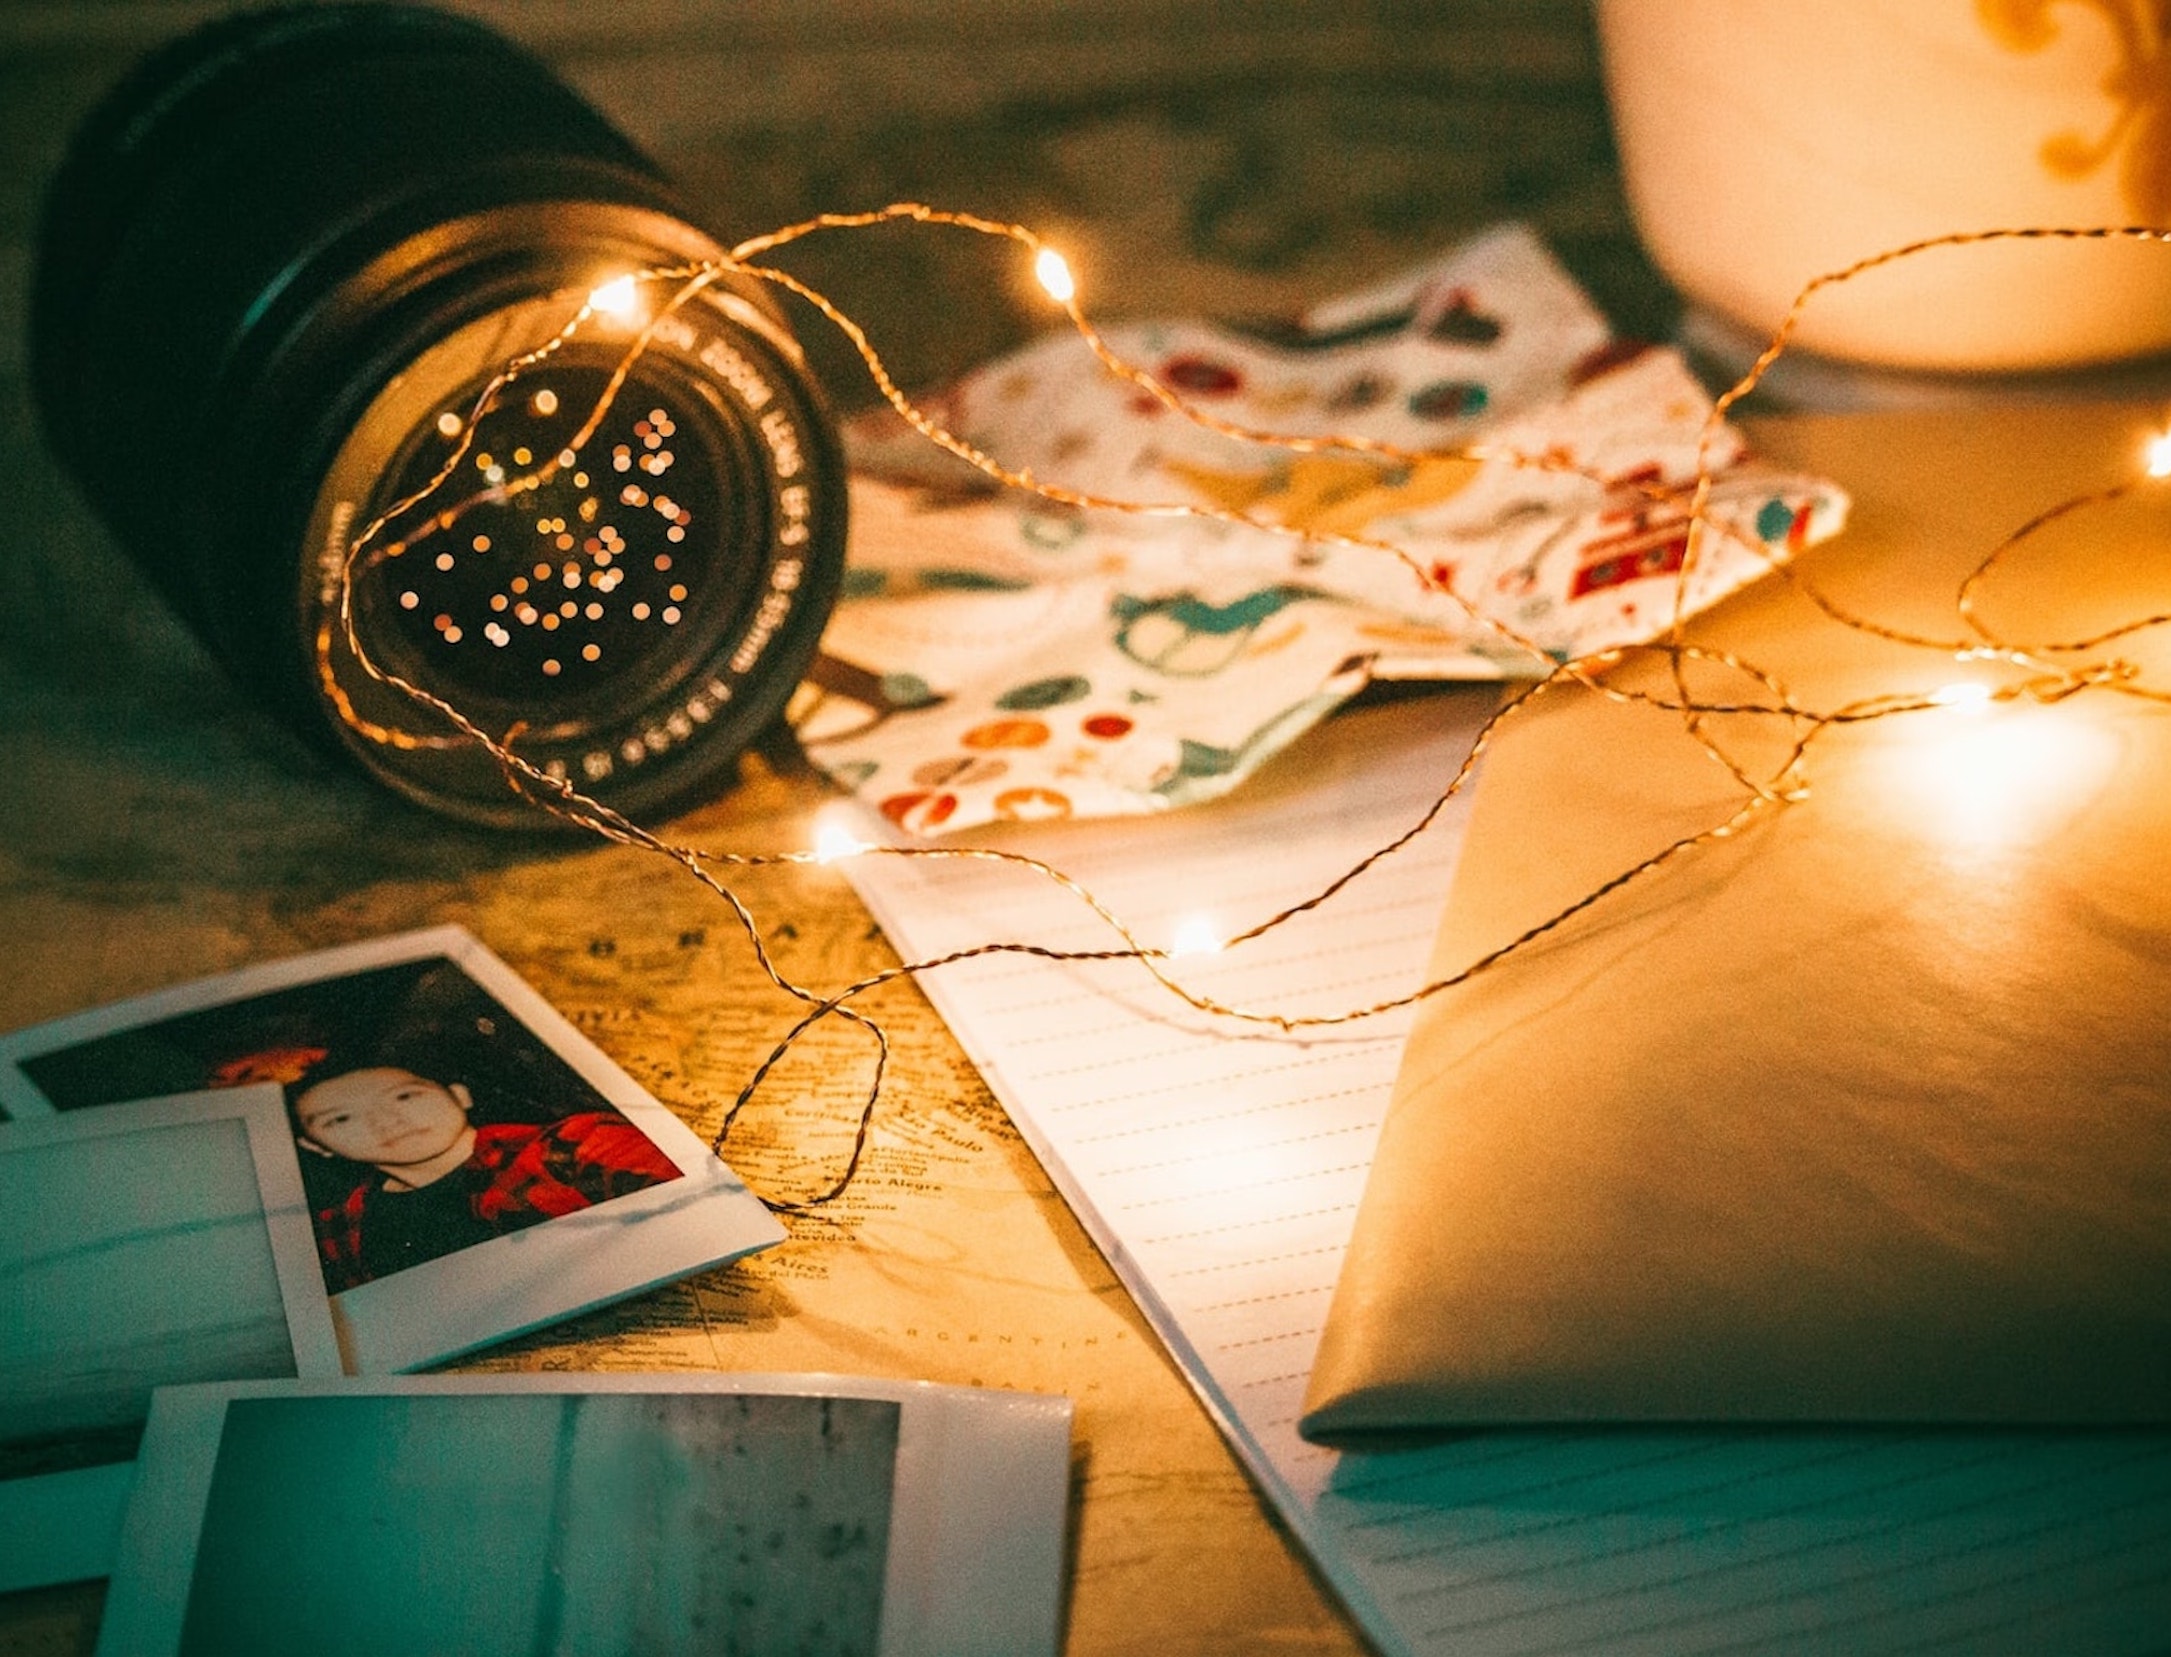 Fairy lights illuminating a work space with photographs and a camera lens.